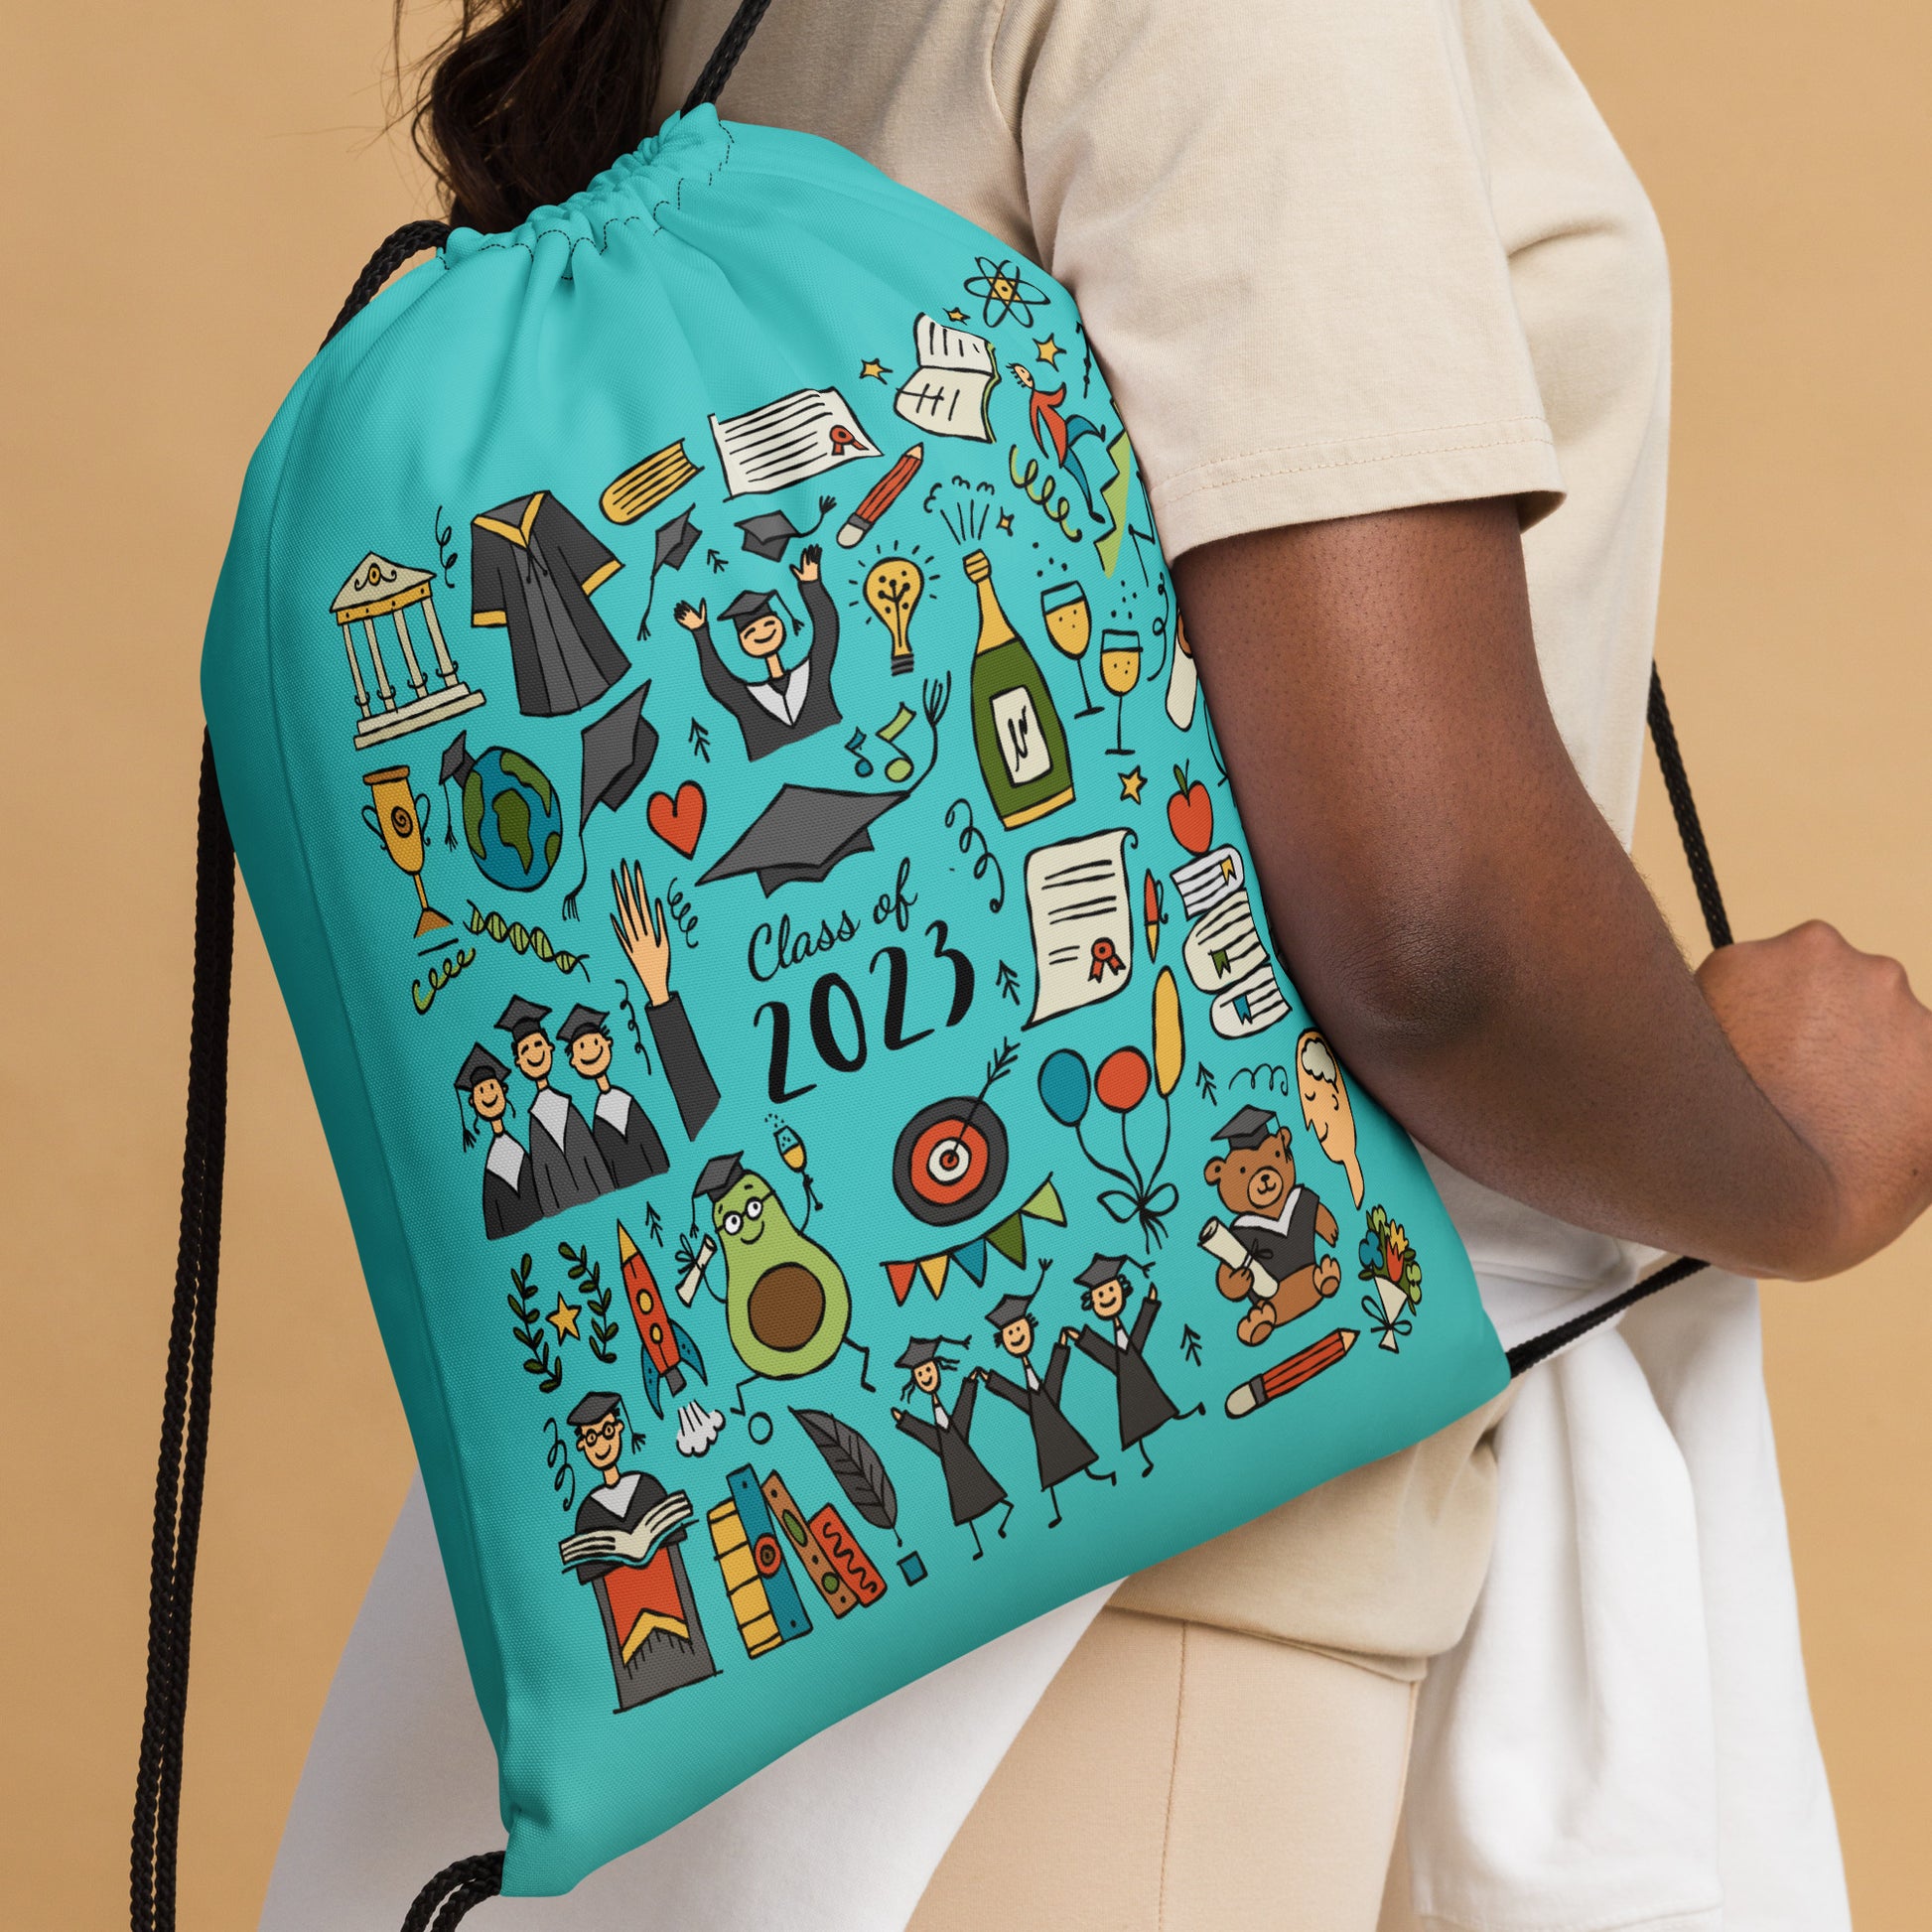 Girl with customised graduation drawstring bag with funny designer print featuring graduates in hats and mantles, school-themed motifs, and a graduation teddy bear. 